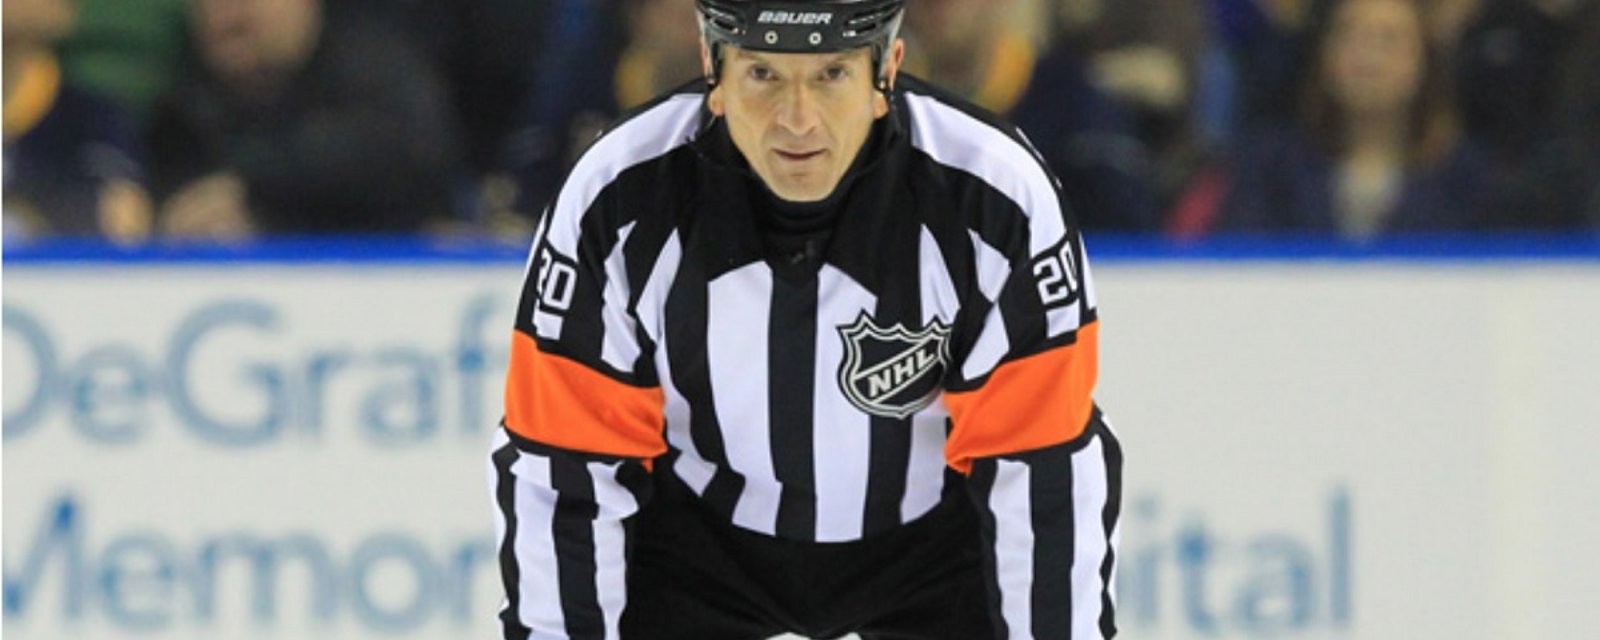 Highly controversial NHL referee gets the call for Game 5 on Saturday.